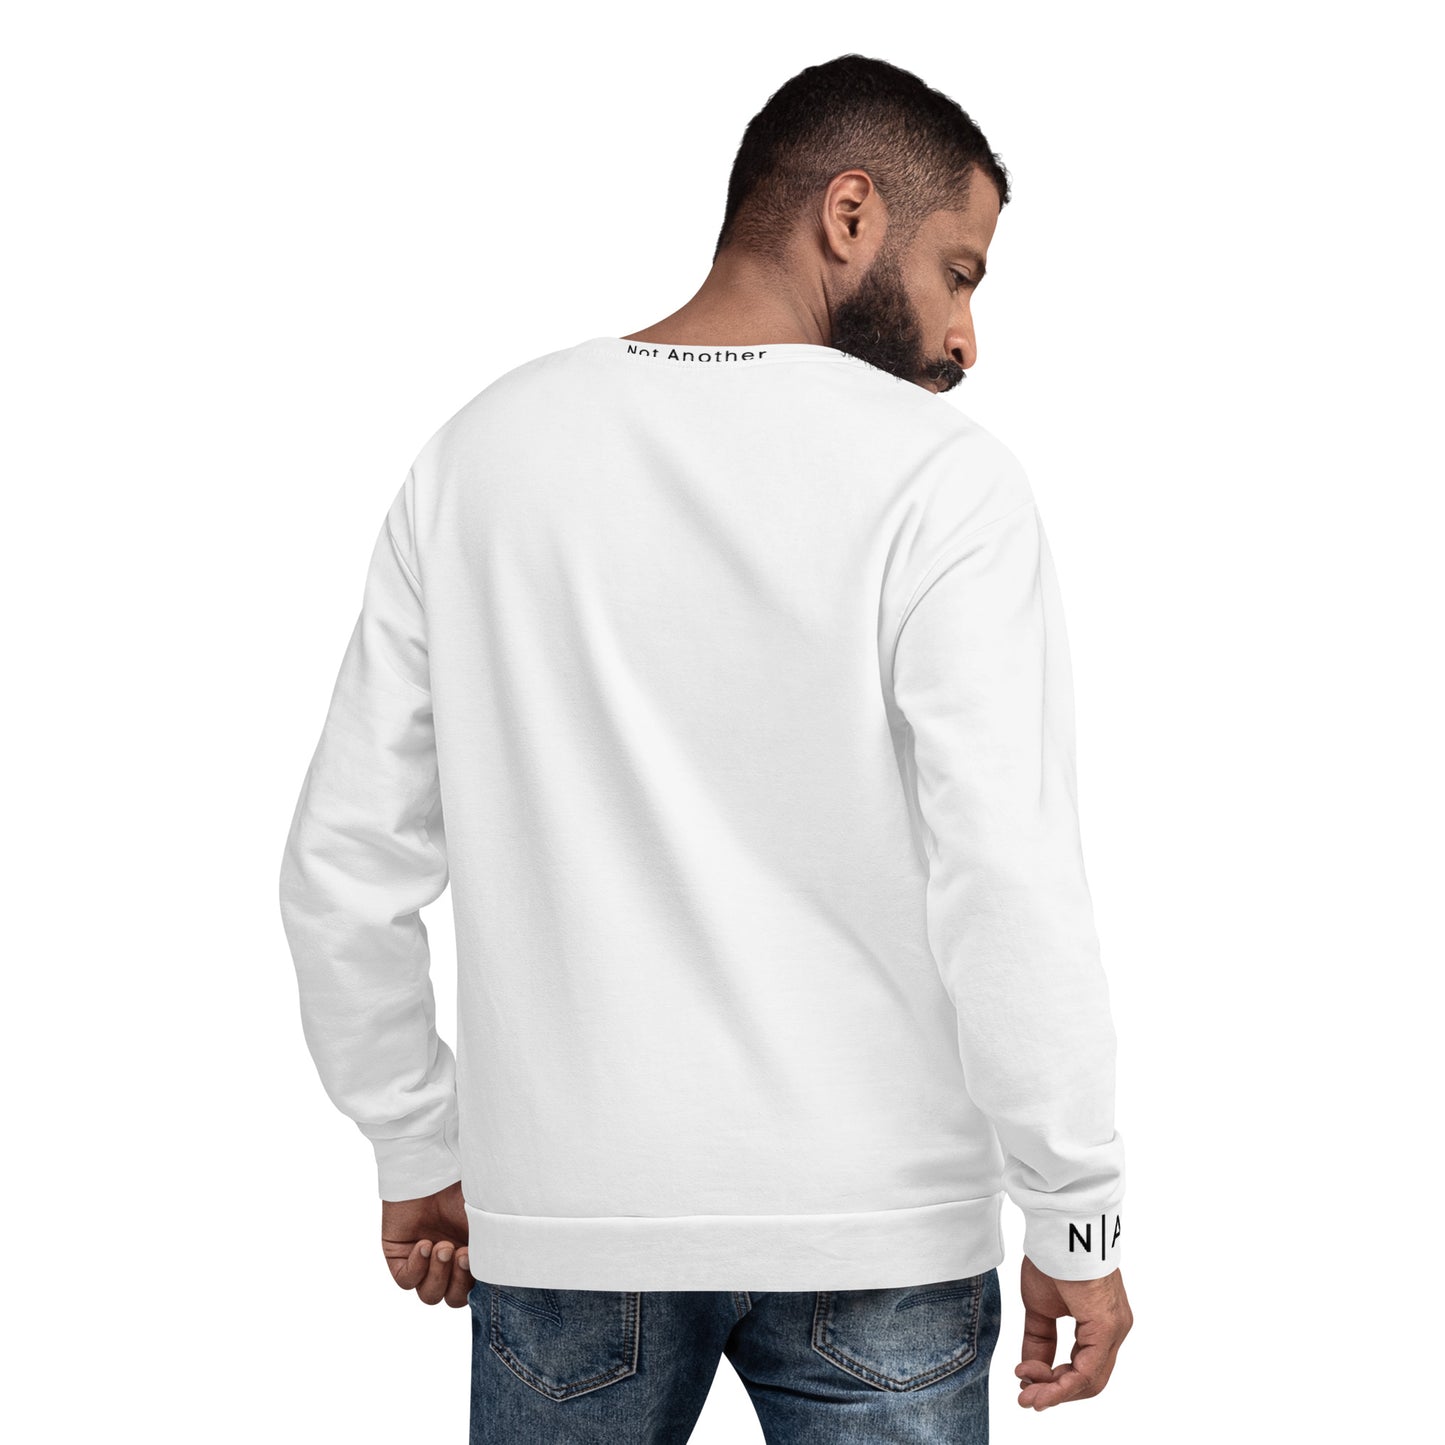 Not Another Sweatshirt (Unisex) - Not Another Store